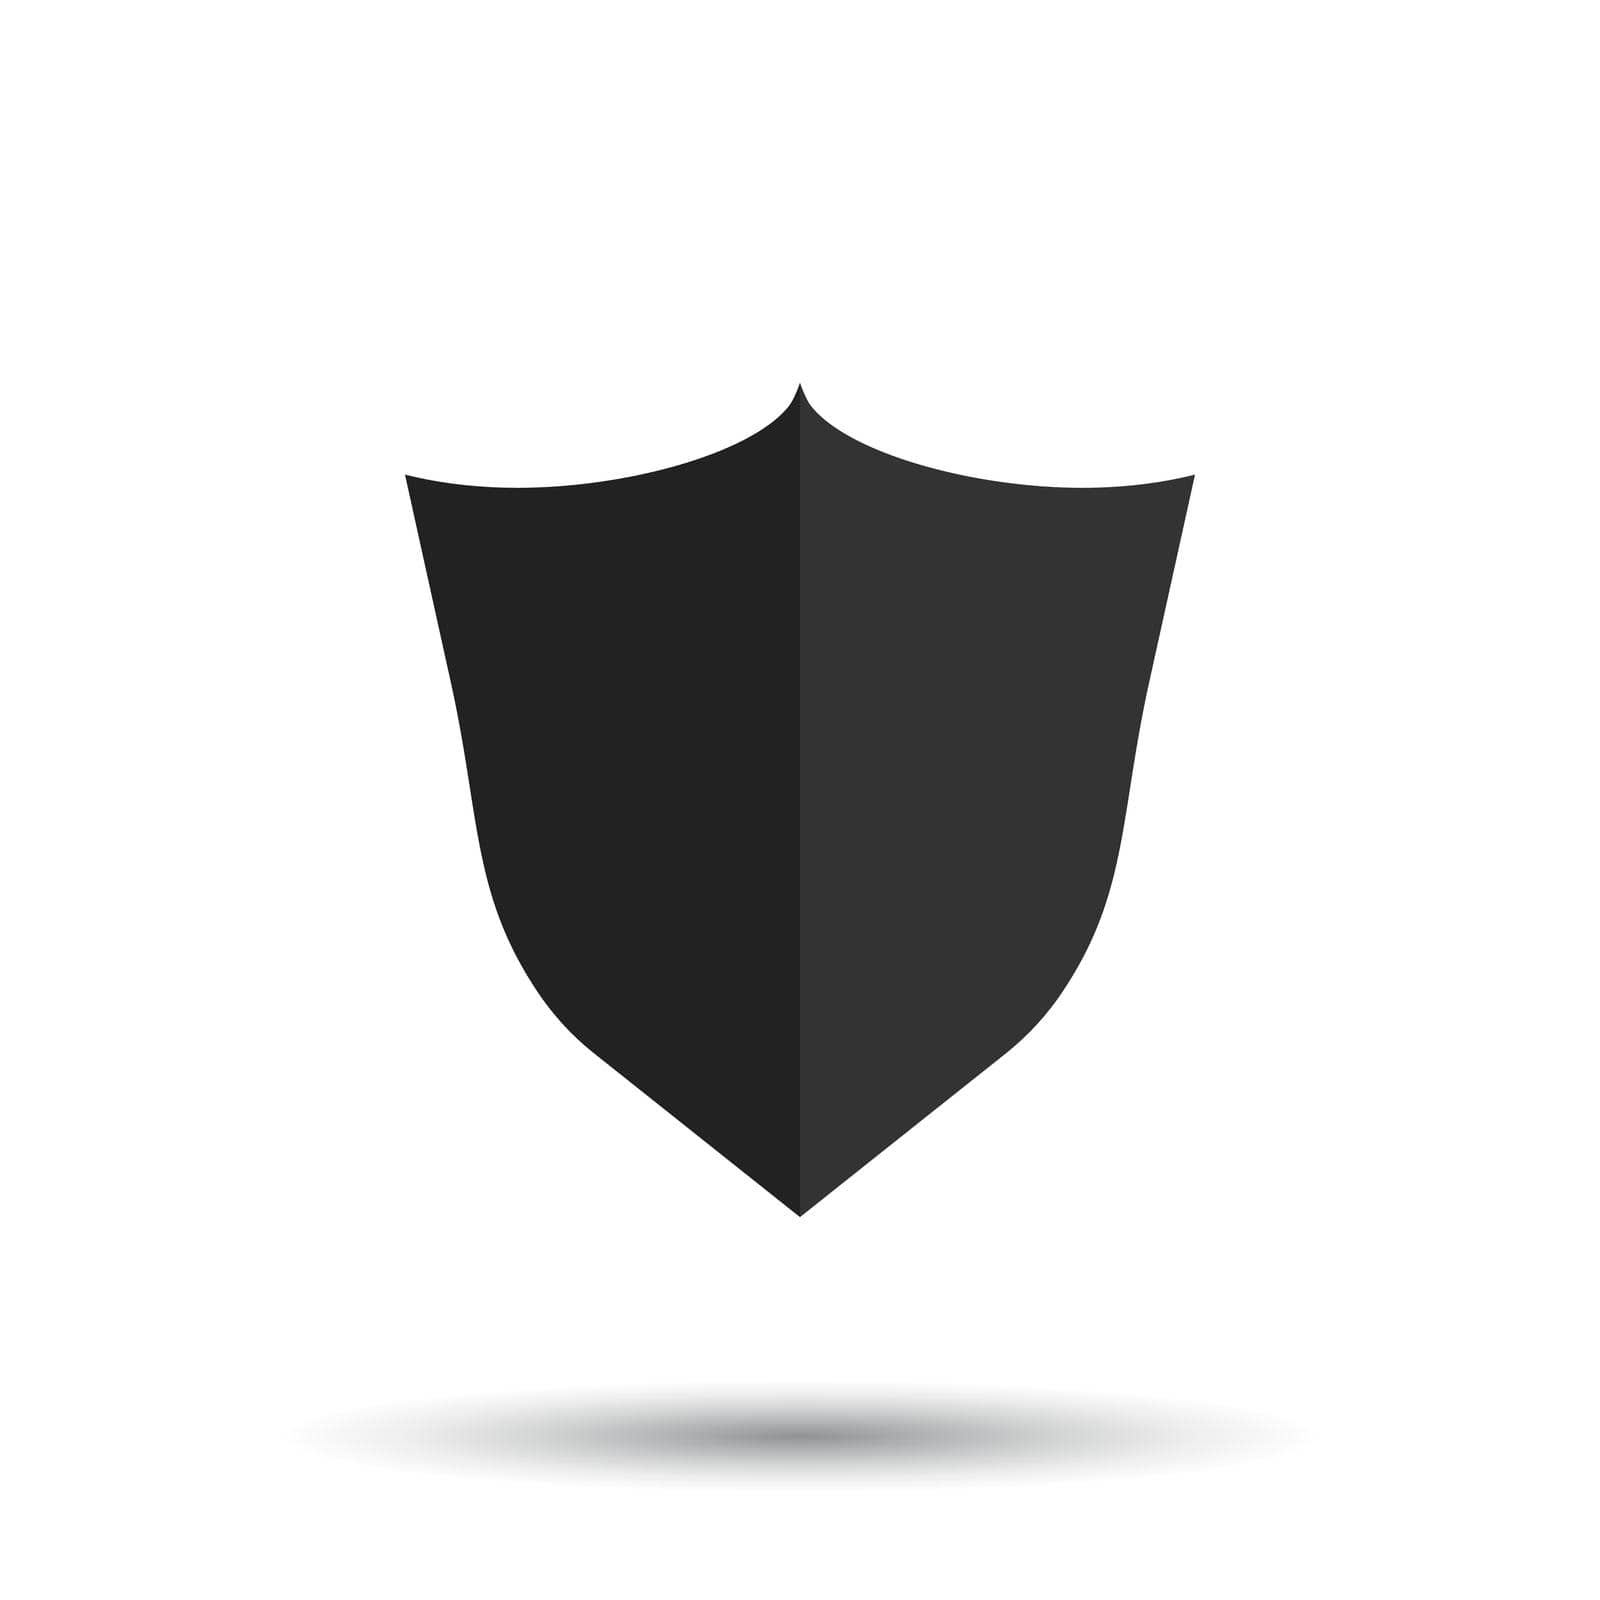 Shield protection icon. Vector illustration in flat style with shadow on white background.